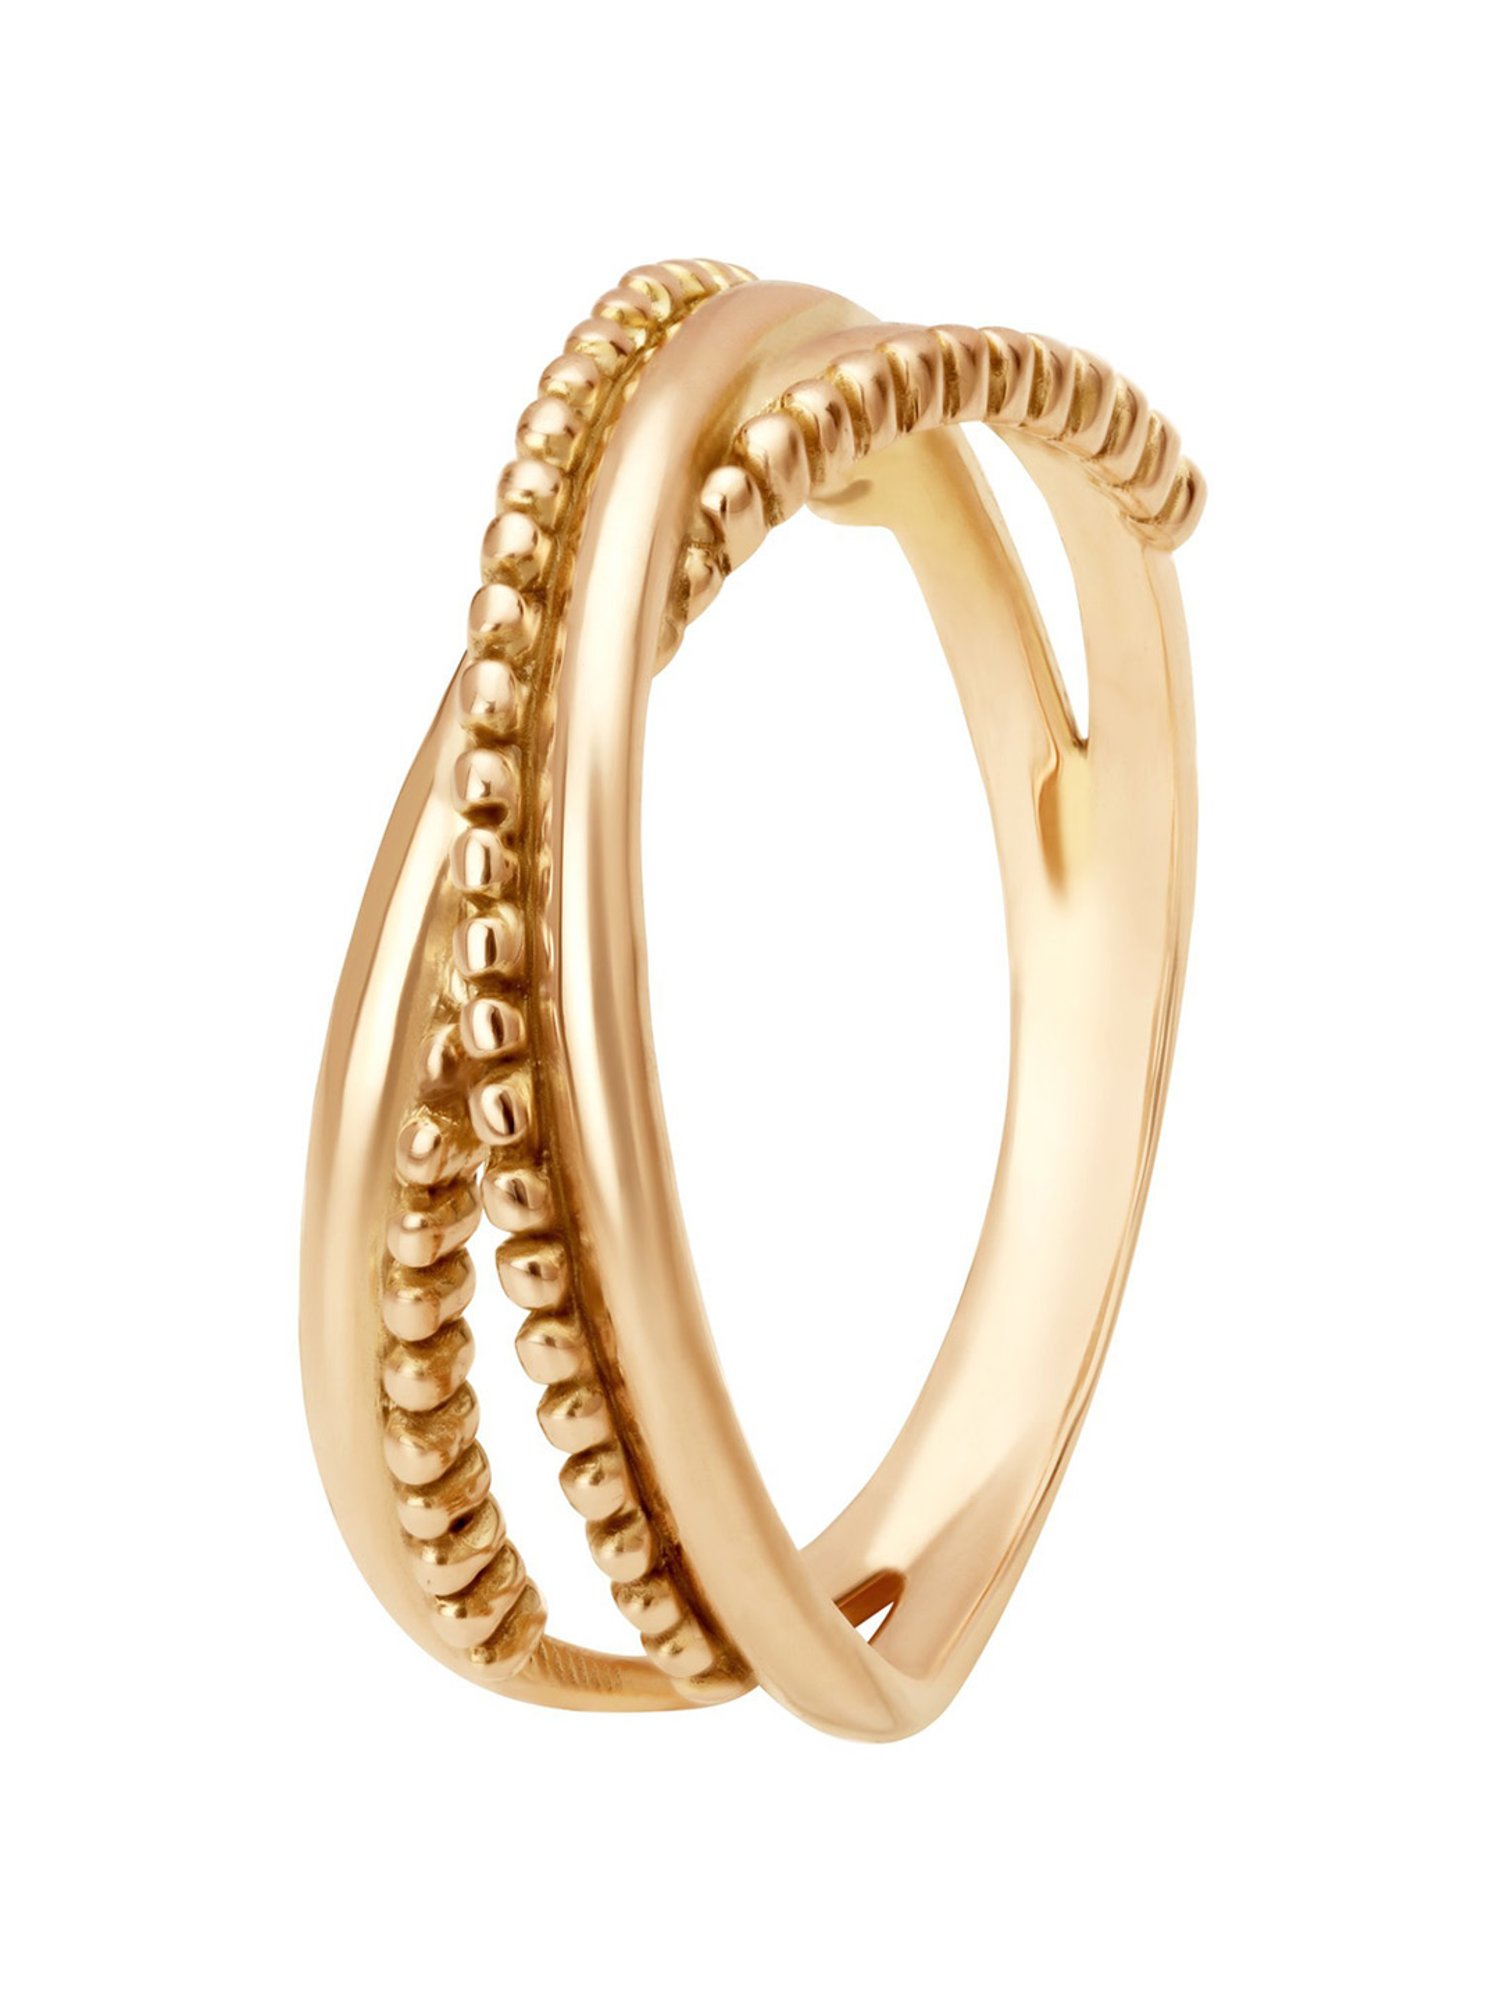 TANISHQ 18KT Gold and Diamond Finger Ring (17.20 mm) in Yamunanagar at best  price by Tanishq - Justdial